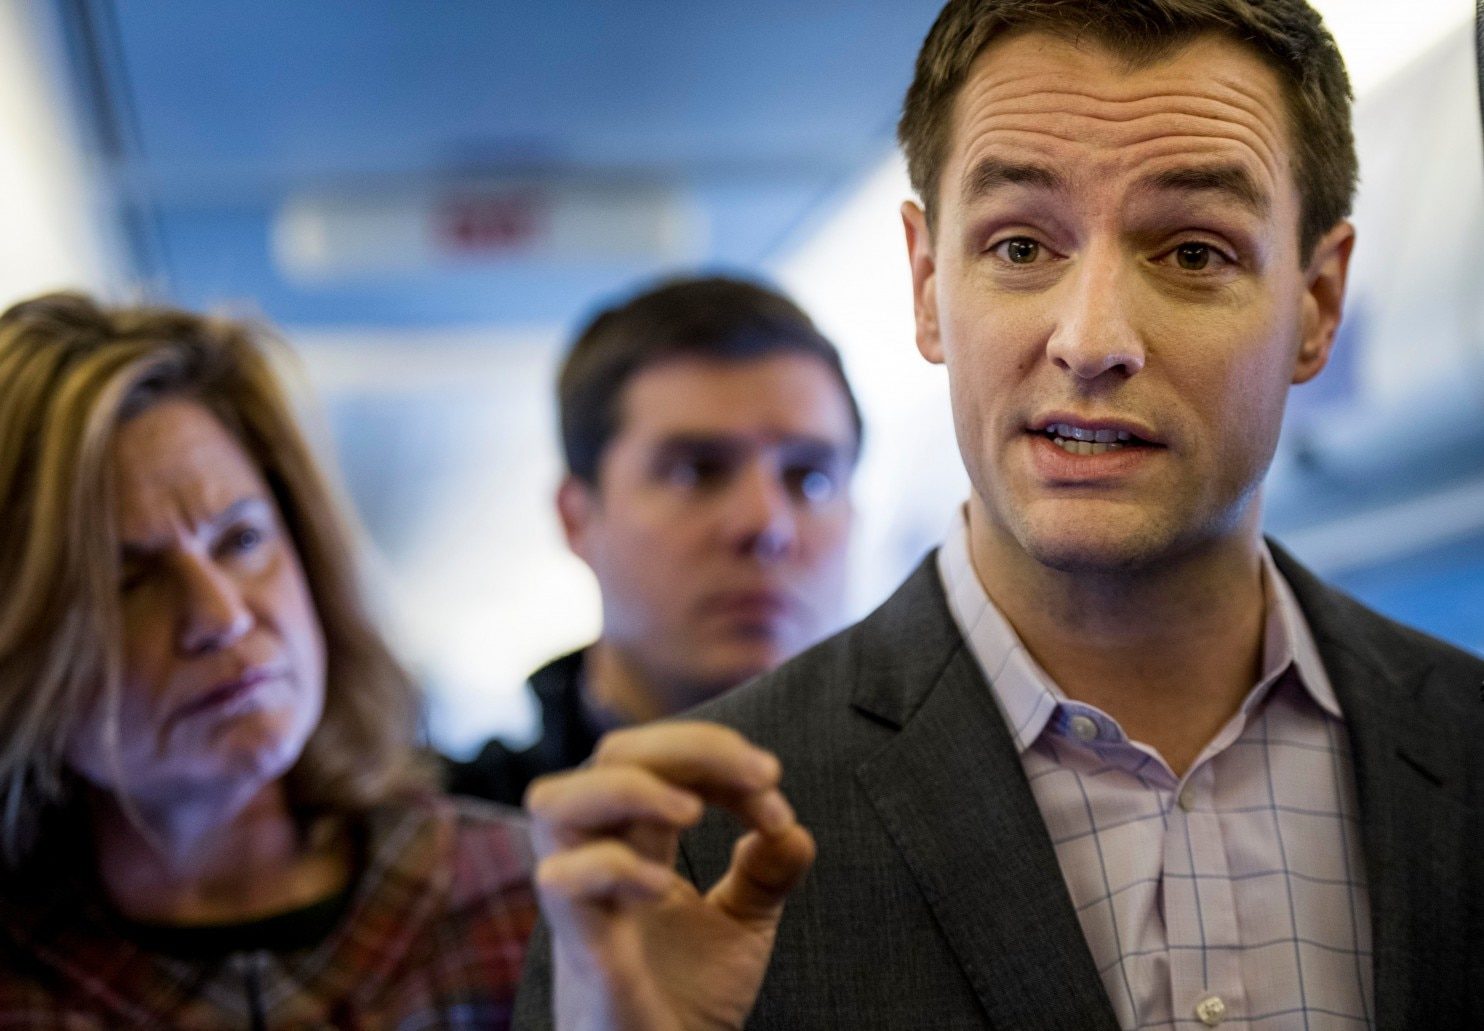 Clinton campaign manager Robby Mook